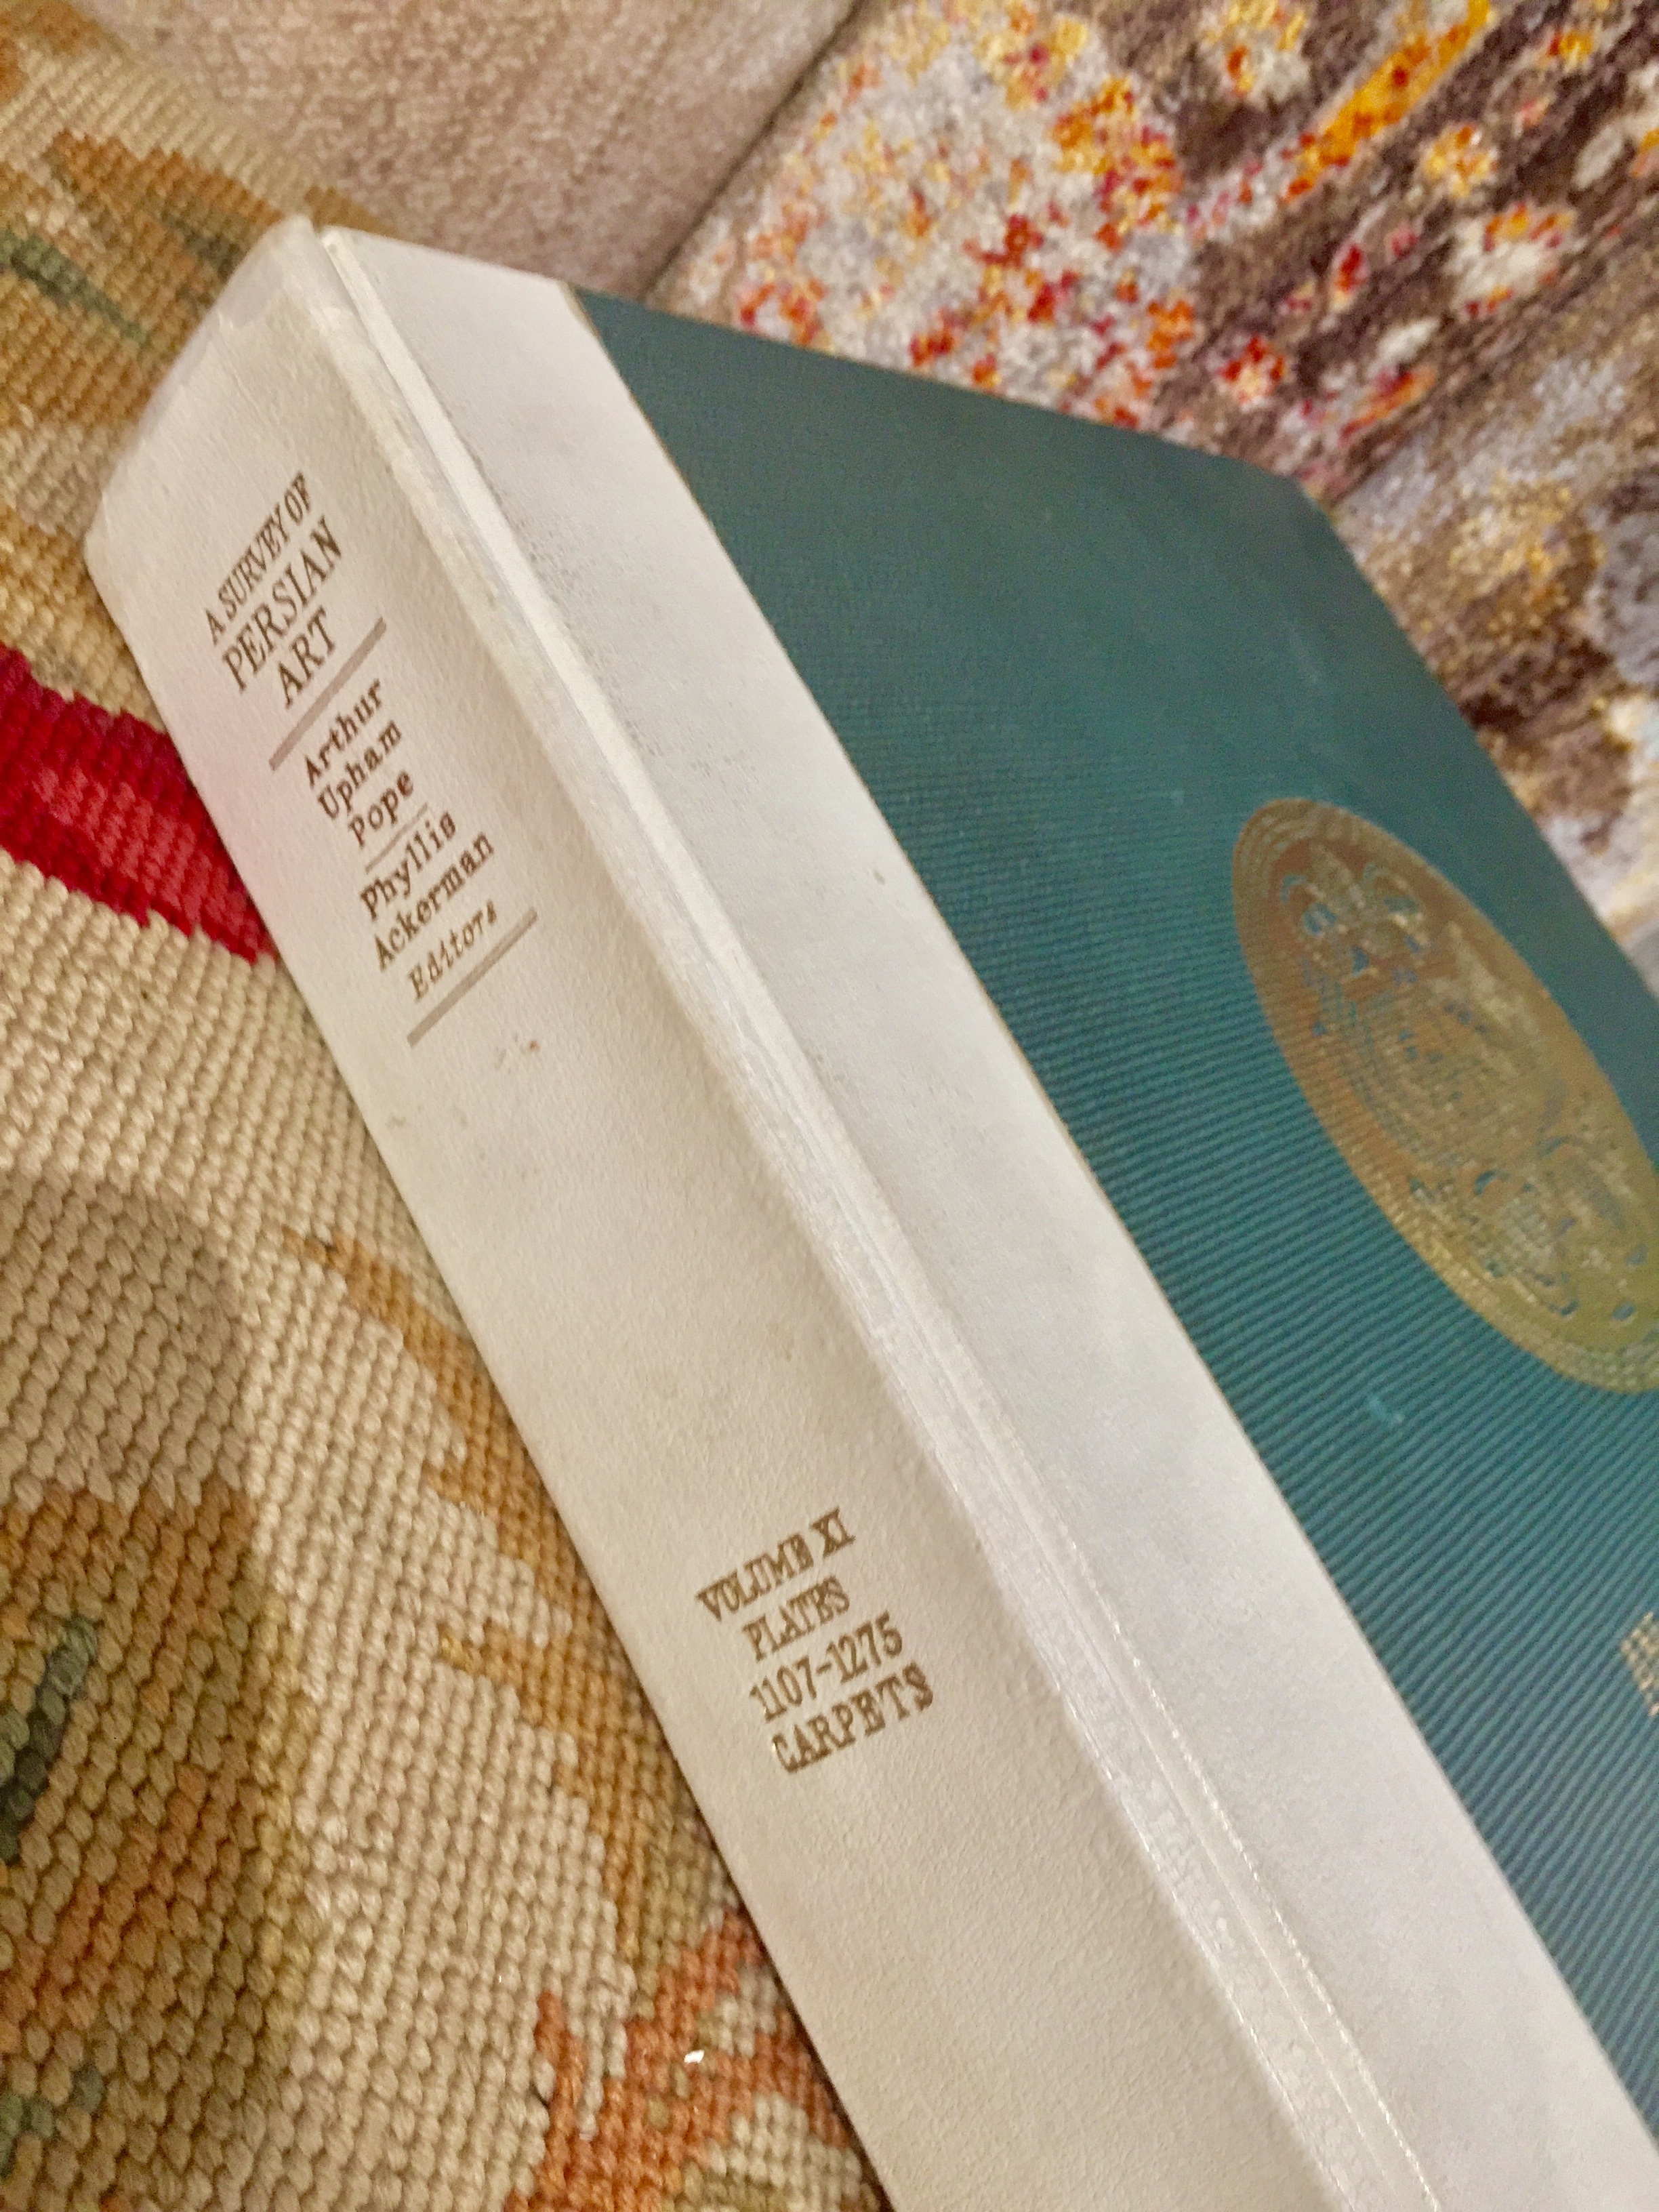 We are super excited to add the Survey of Persian Art books written by Arthur Upham Pope to our Library collection